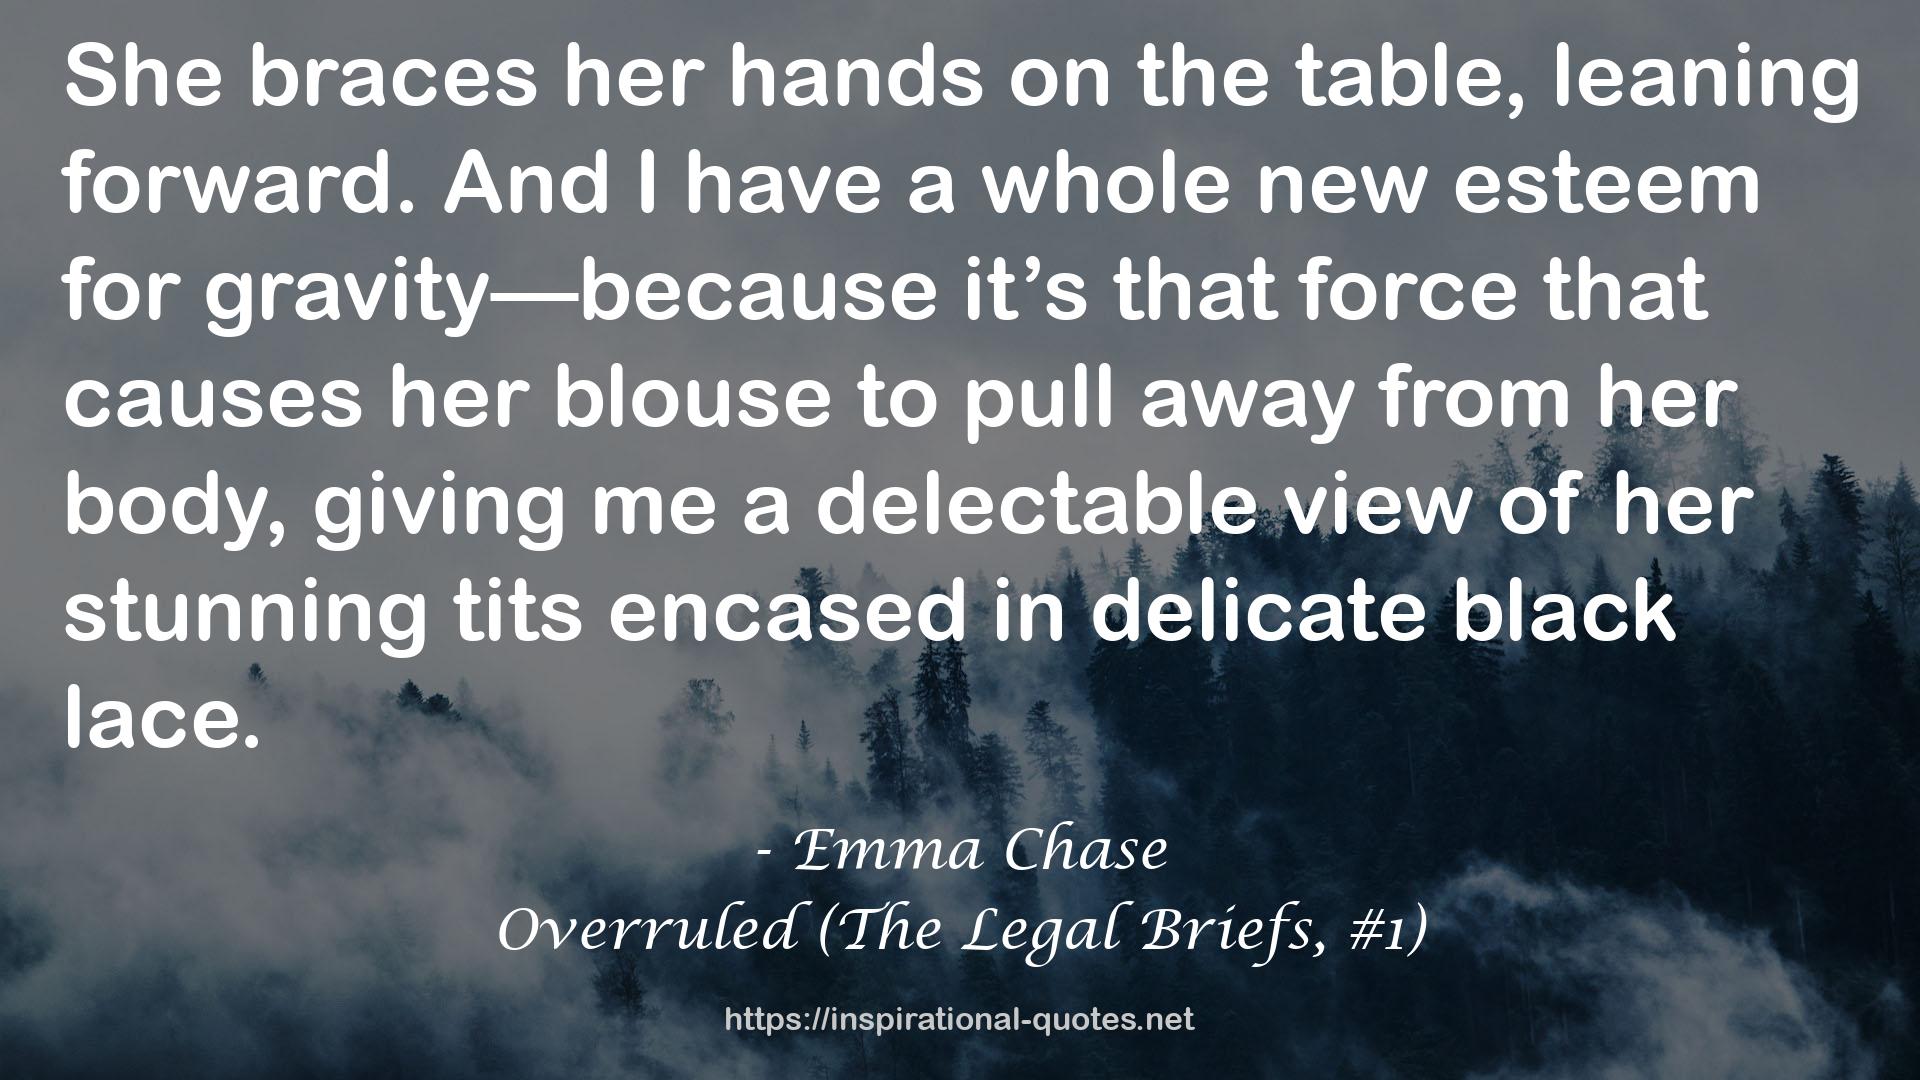 Overruled (The Legal Briefs, #1) QUOTES